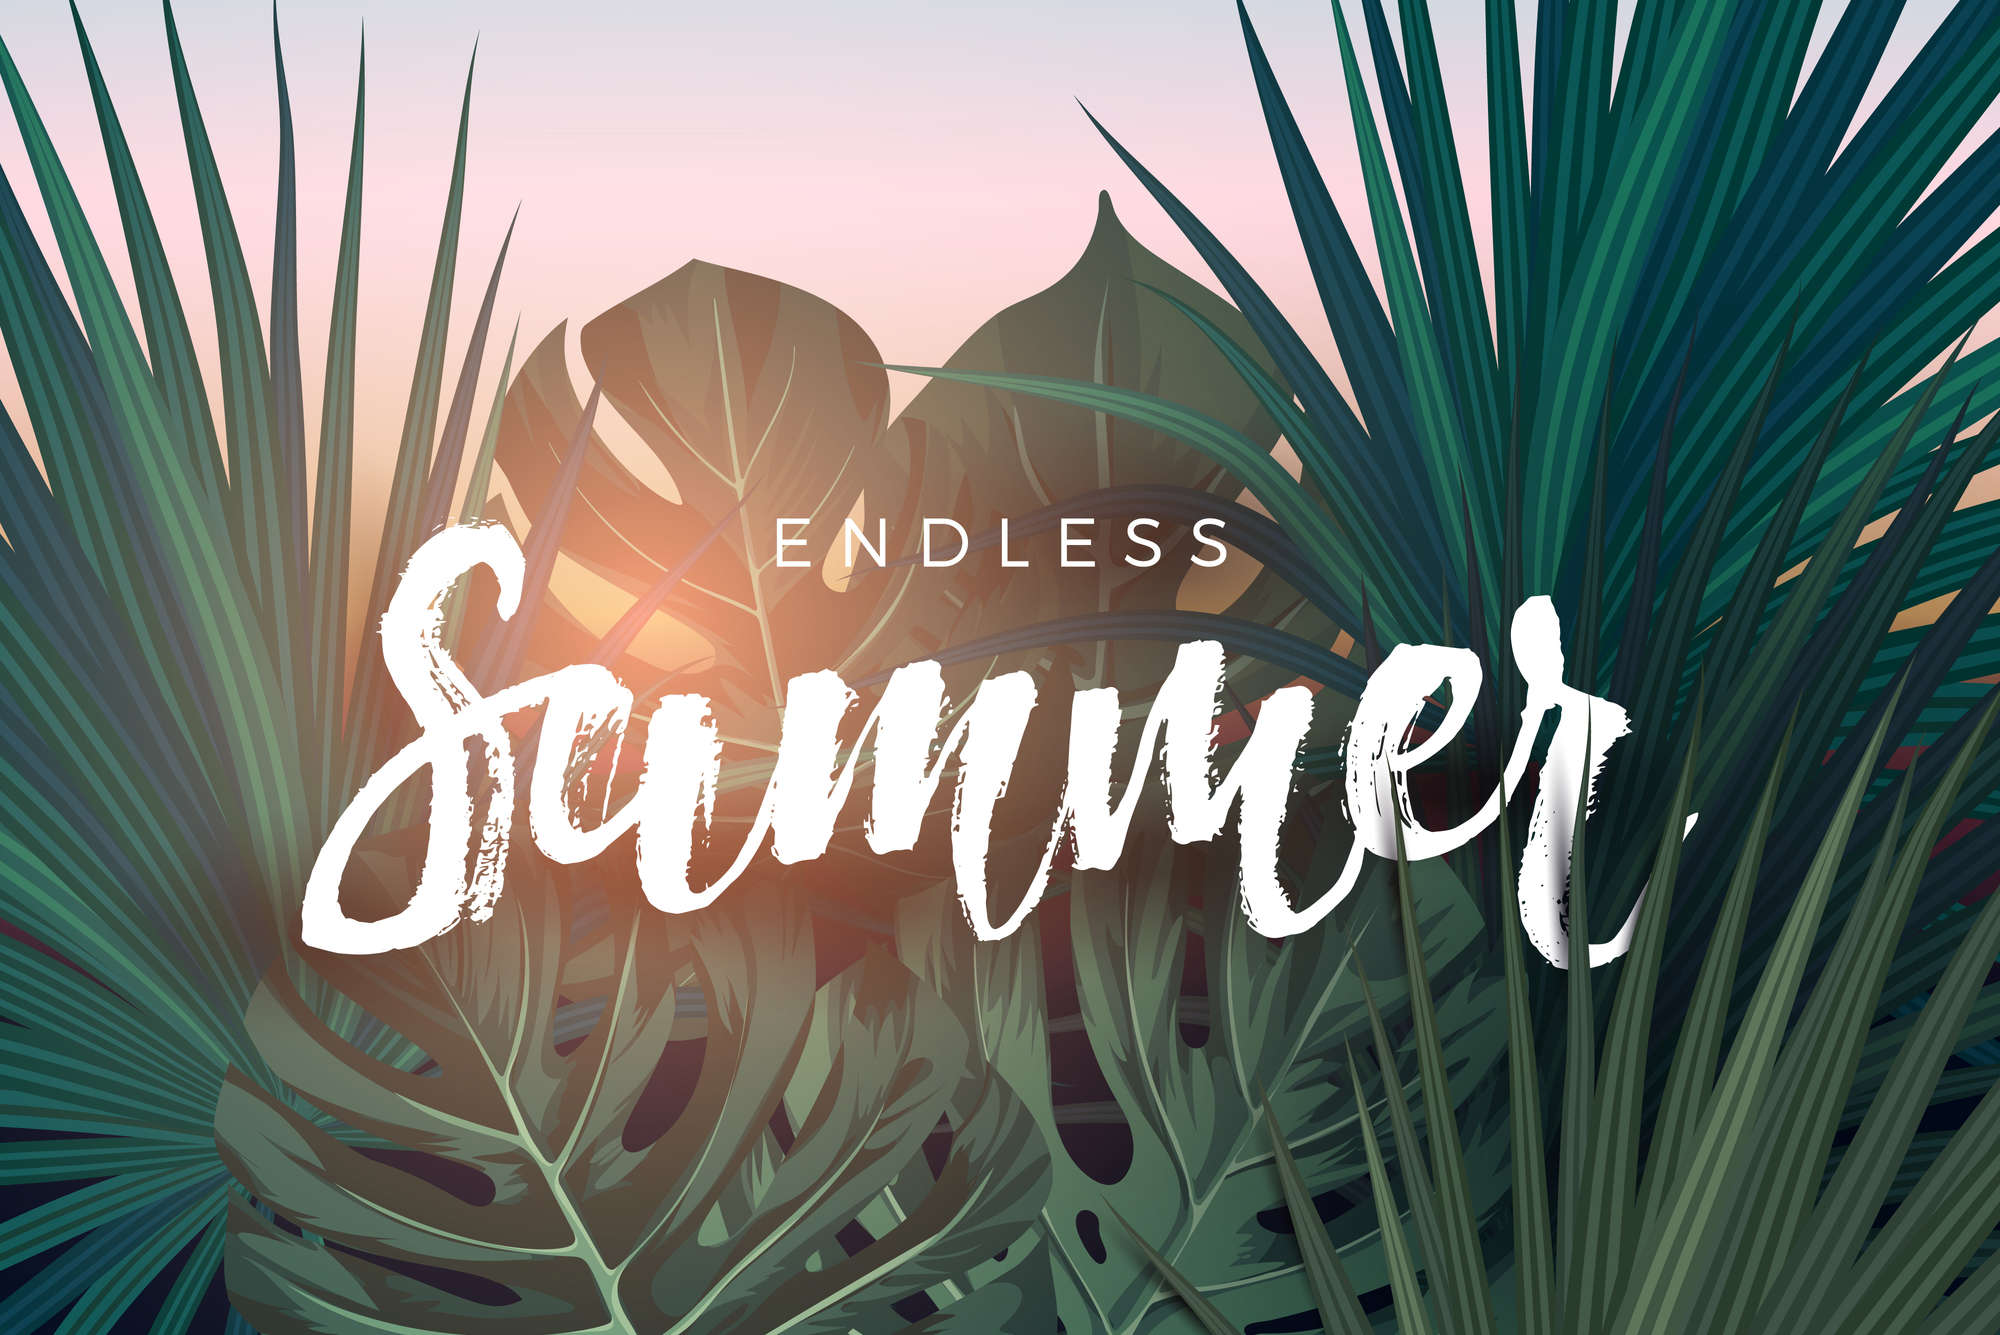             Graphic wall mural "Endless Summer" lettering on mother of pearl smooth non-woven
        